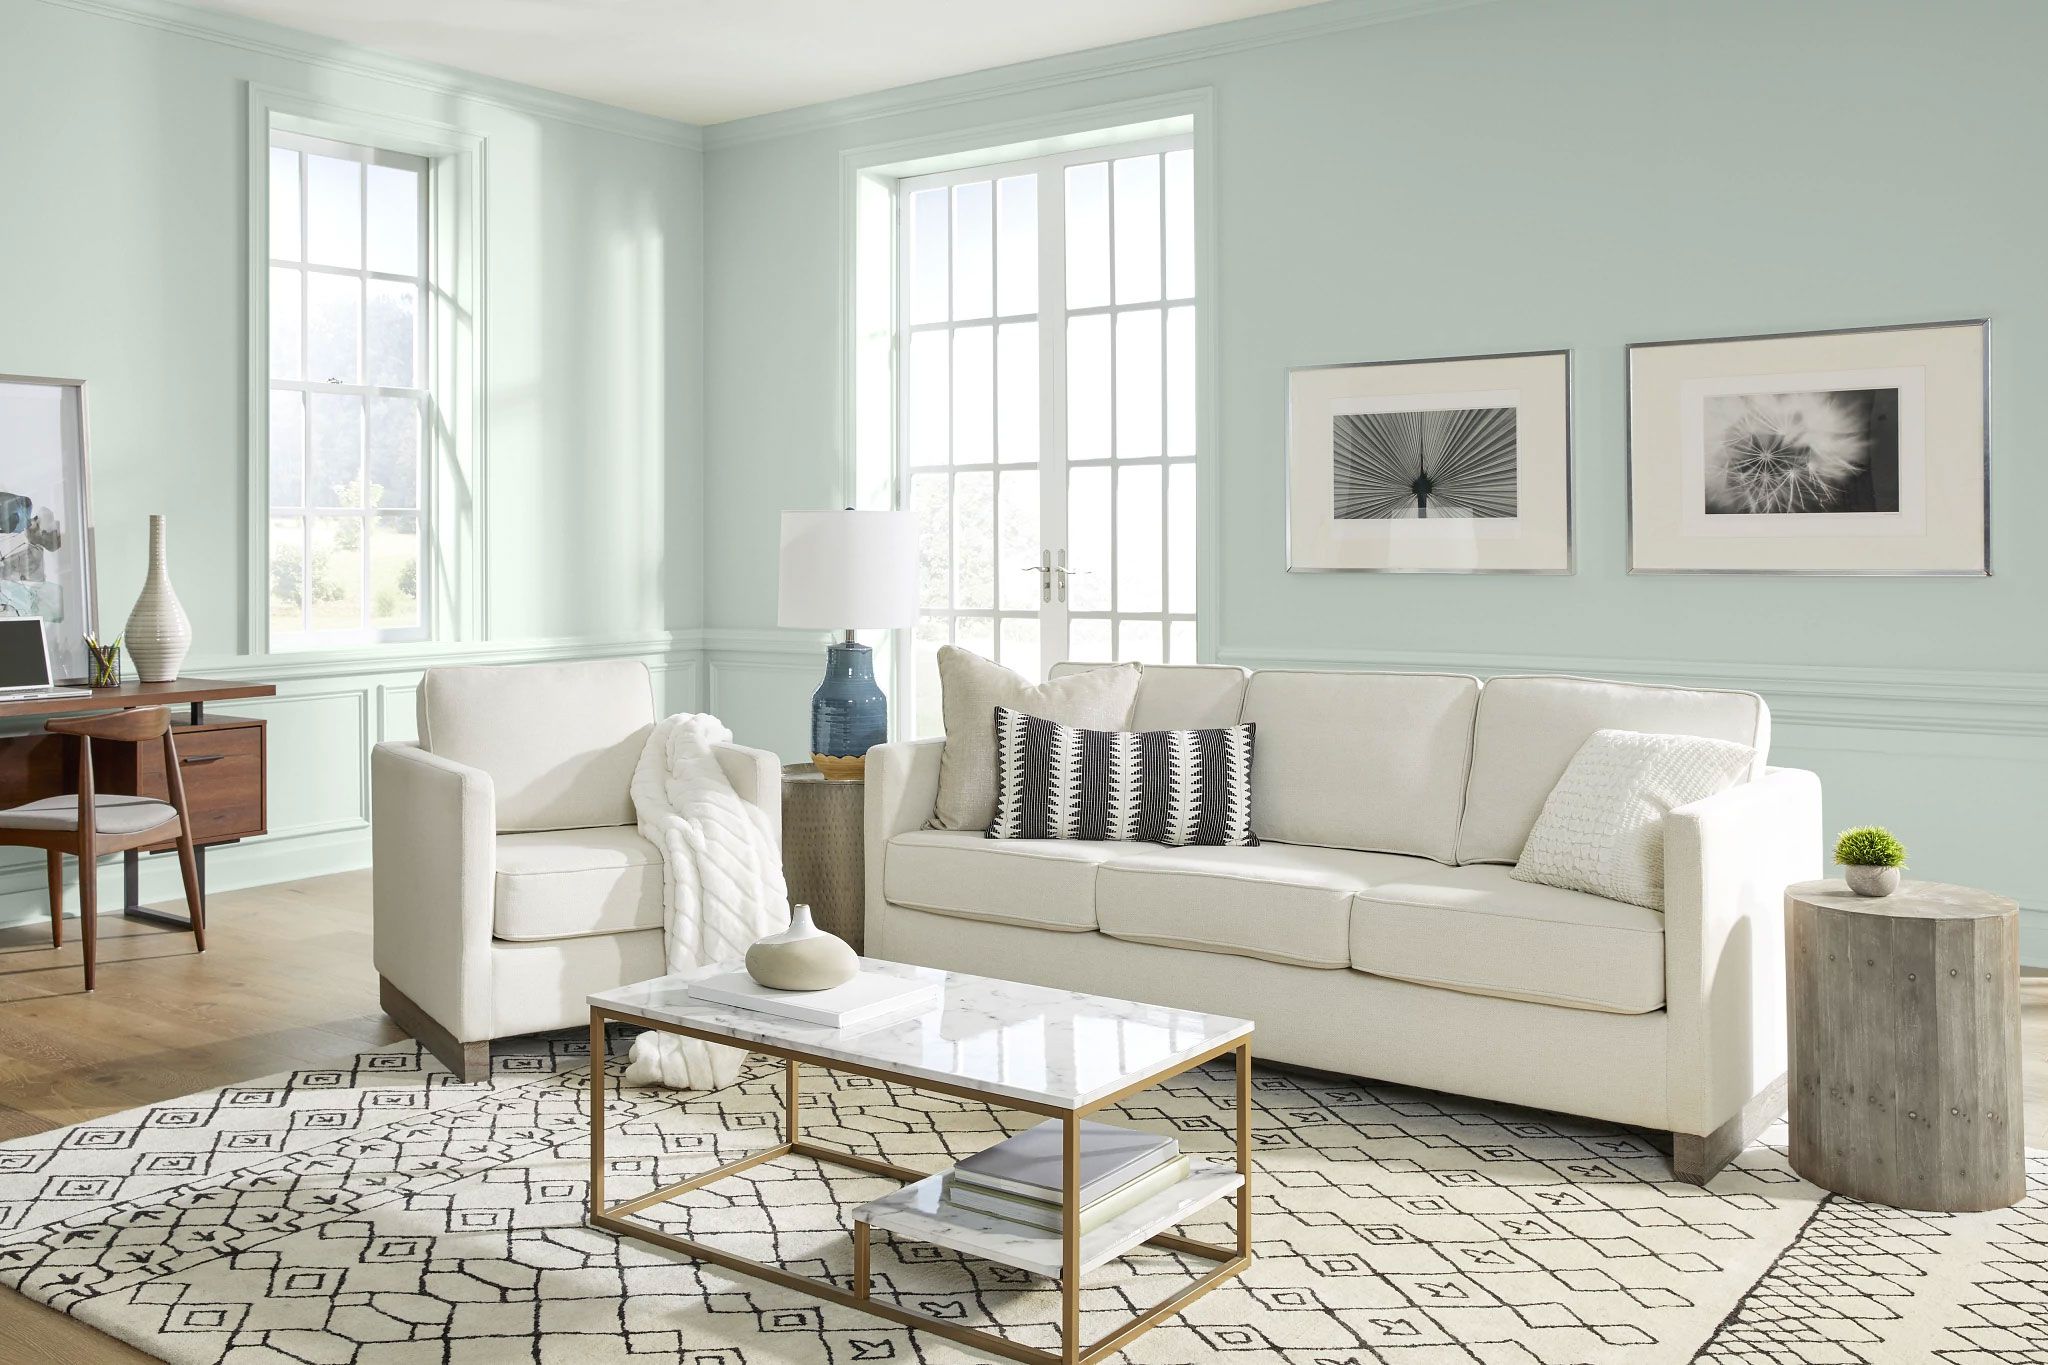 The Color Trends Experts Expect to See Everywhere This Year